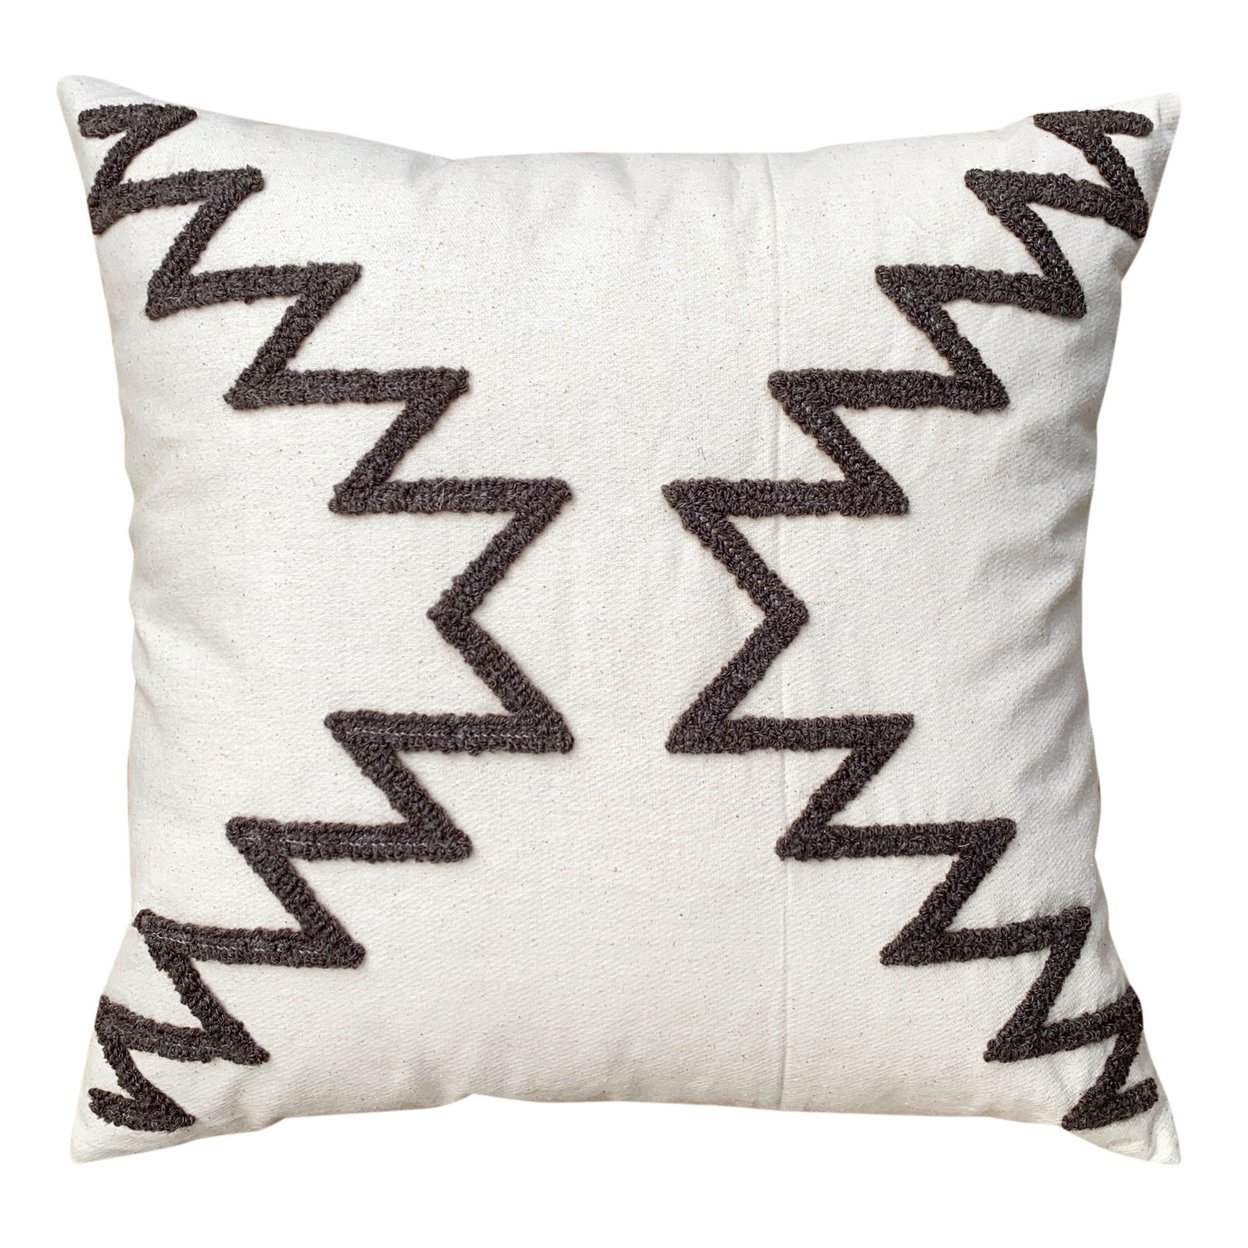 17 x 17 Inch Square Cotton Accent Throw Pillows Geometric Aztec Embroidery Set of 2 White Gray - Saltoro Sherpi - image 3 of 7